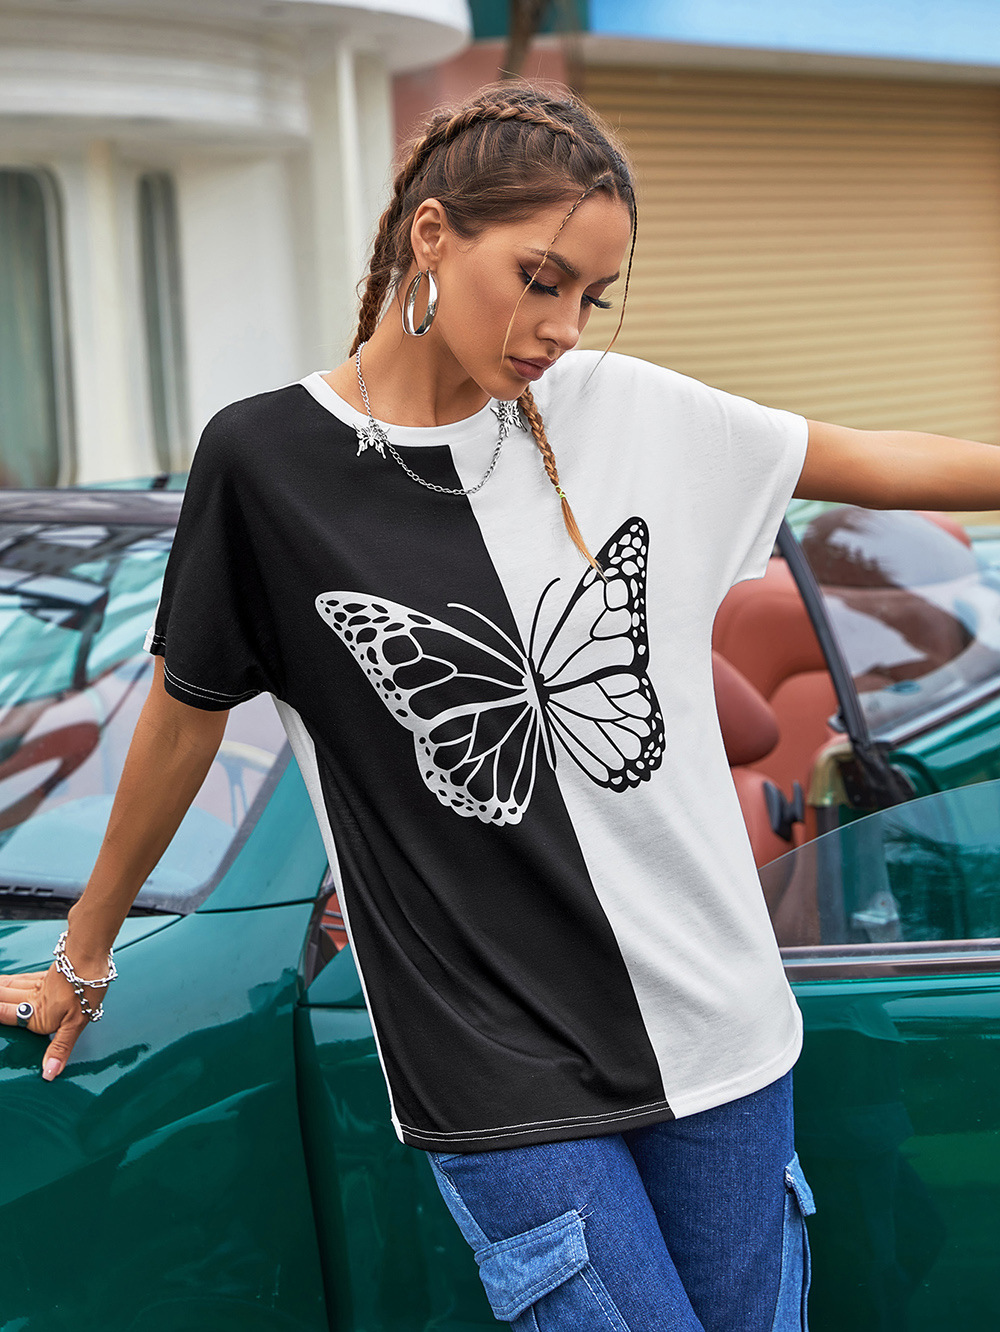 Fashion Women's T-shirt Casual Black And White Butterfly Print Top Loose Short Sleeve Harajuku T-shirts Basic O Neck Tops New summer crop top